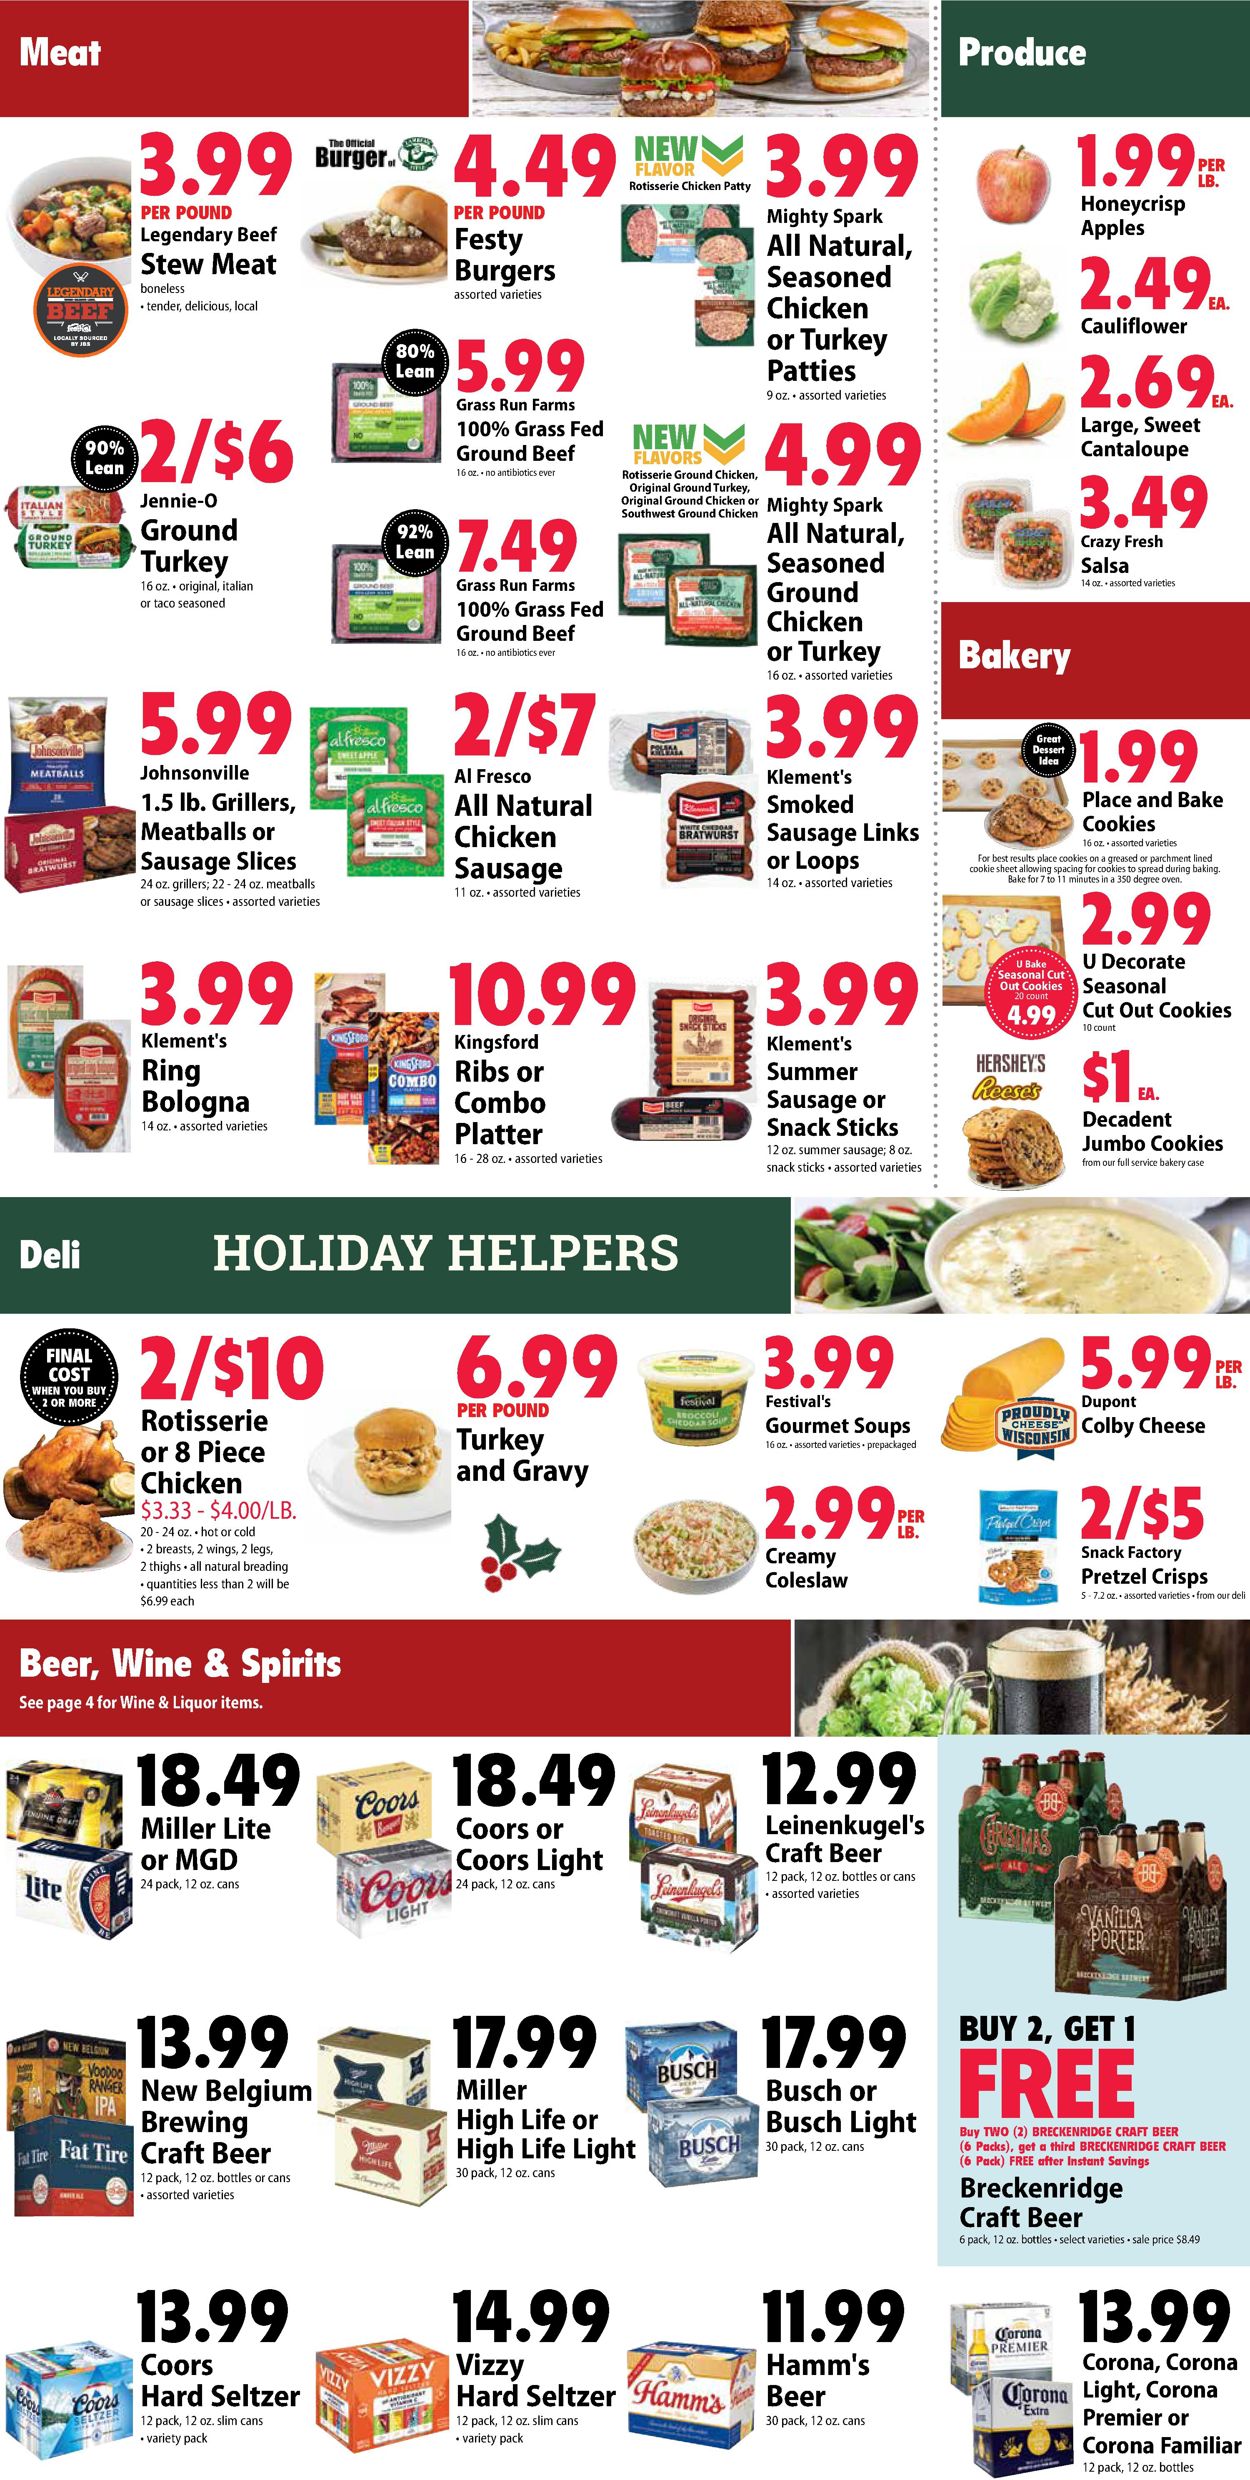 Festival Foods Current weekly ad 12/02 - 12/08/2020 [5] - frequent-ads.com